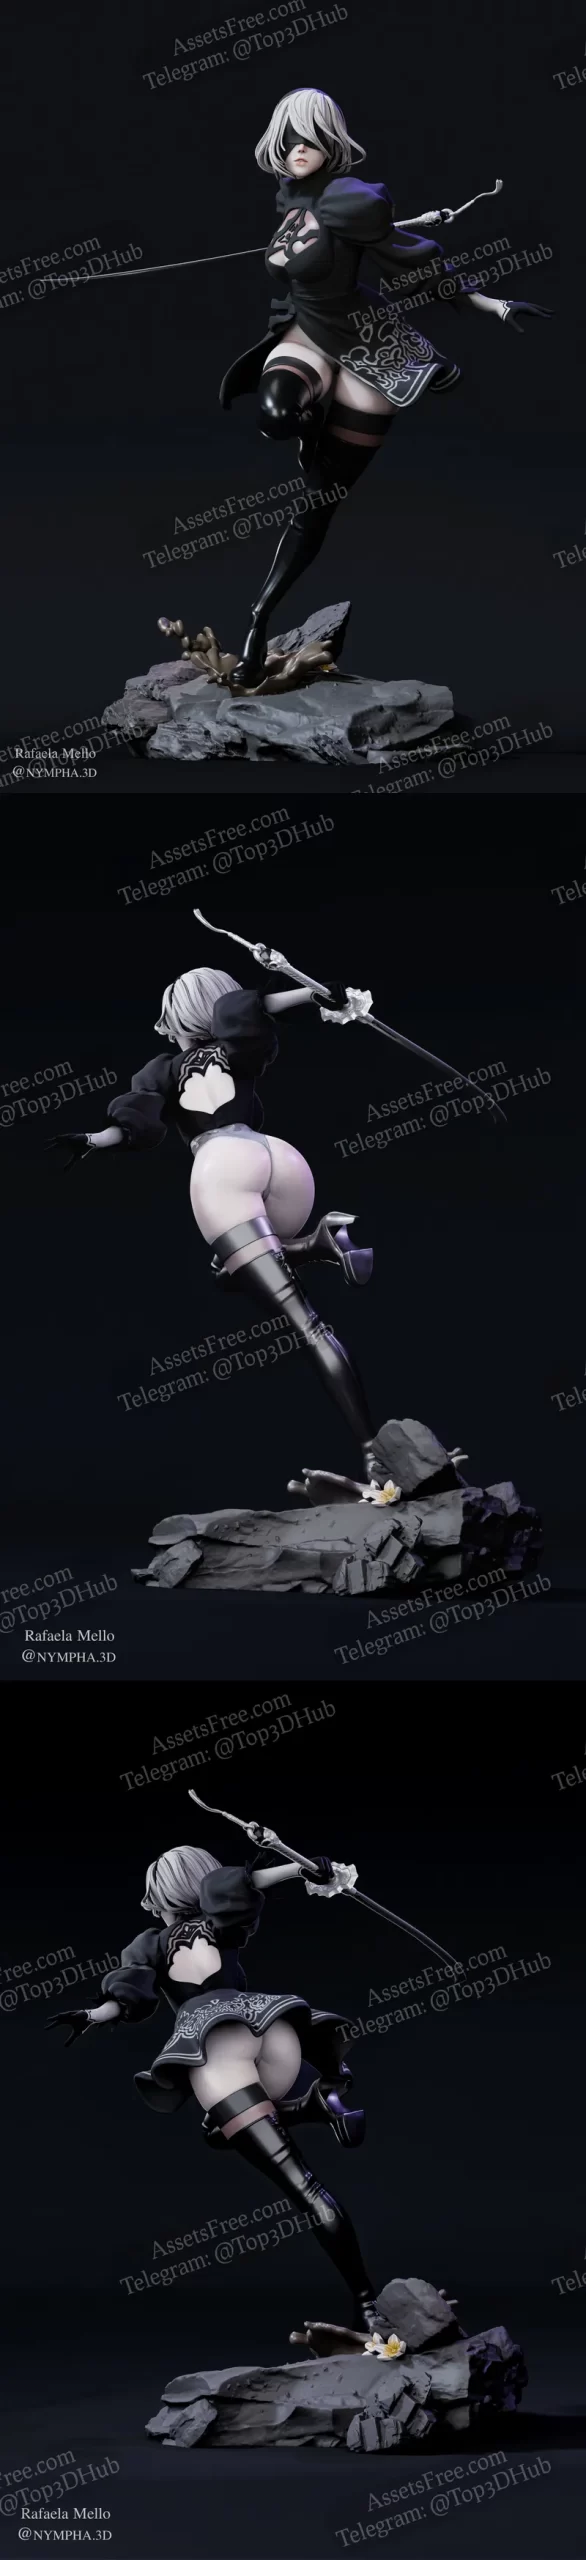 2B Nier Automata - Sleek Combatant: 3D Print Your Own Powerful Android Warrior